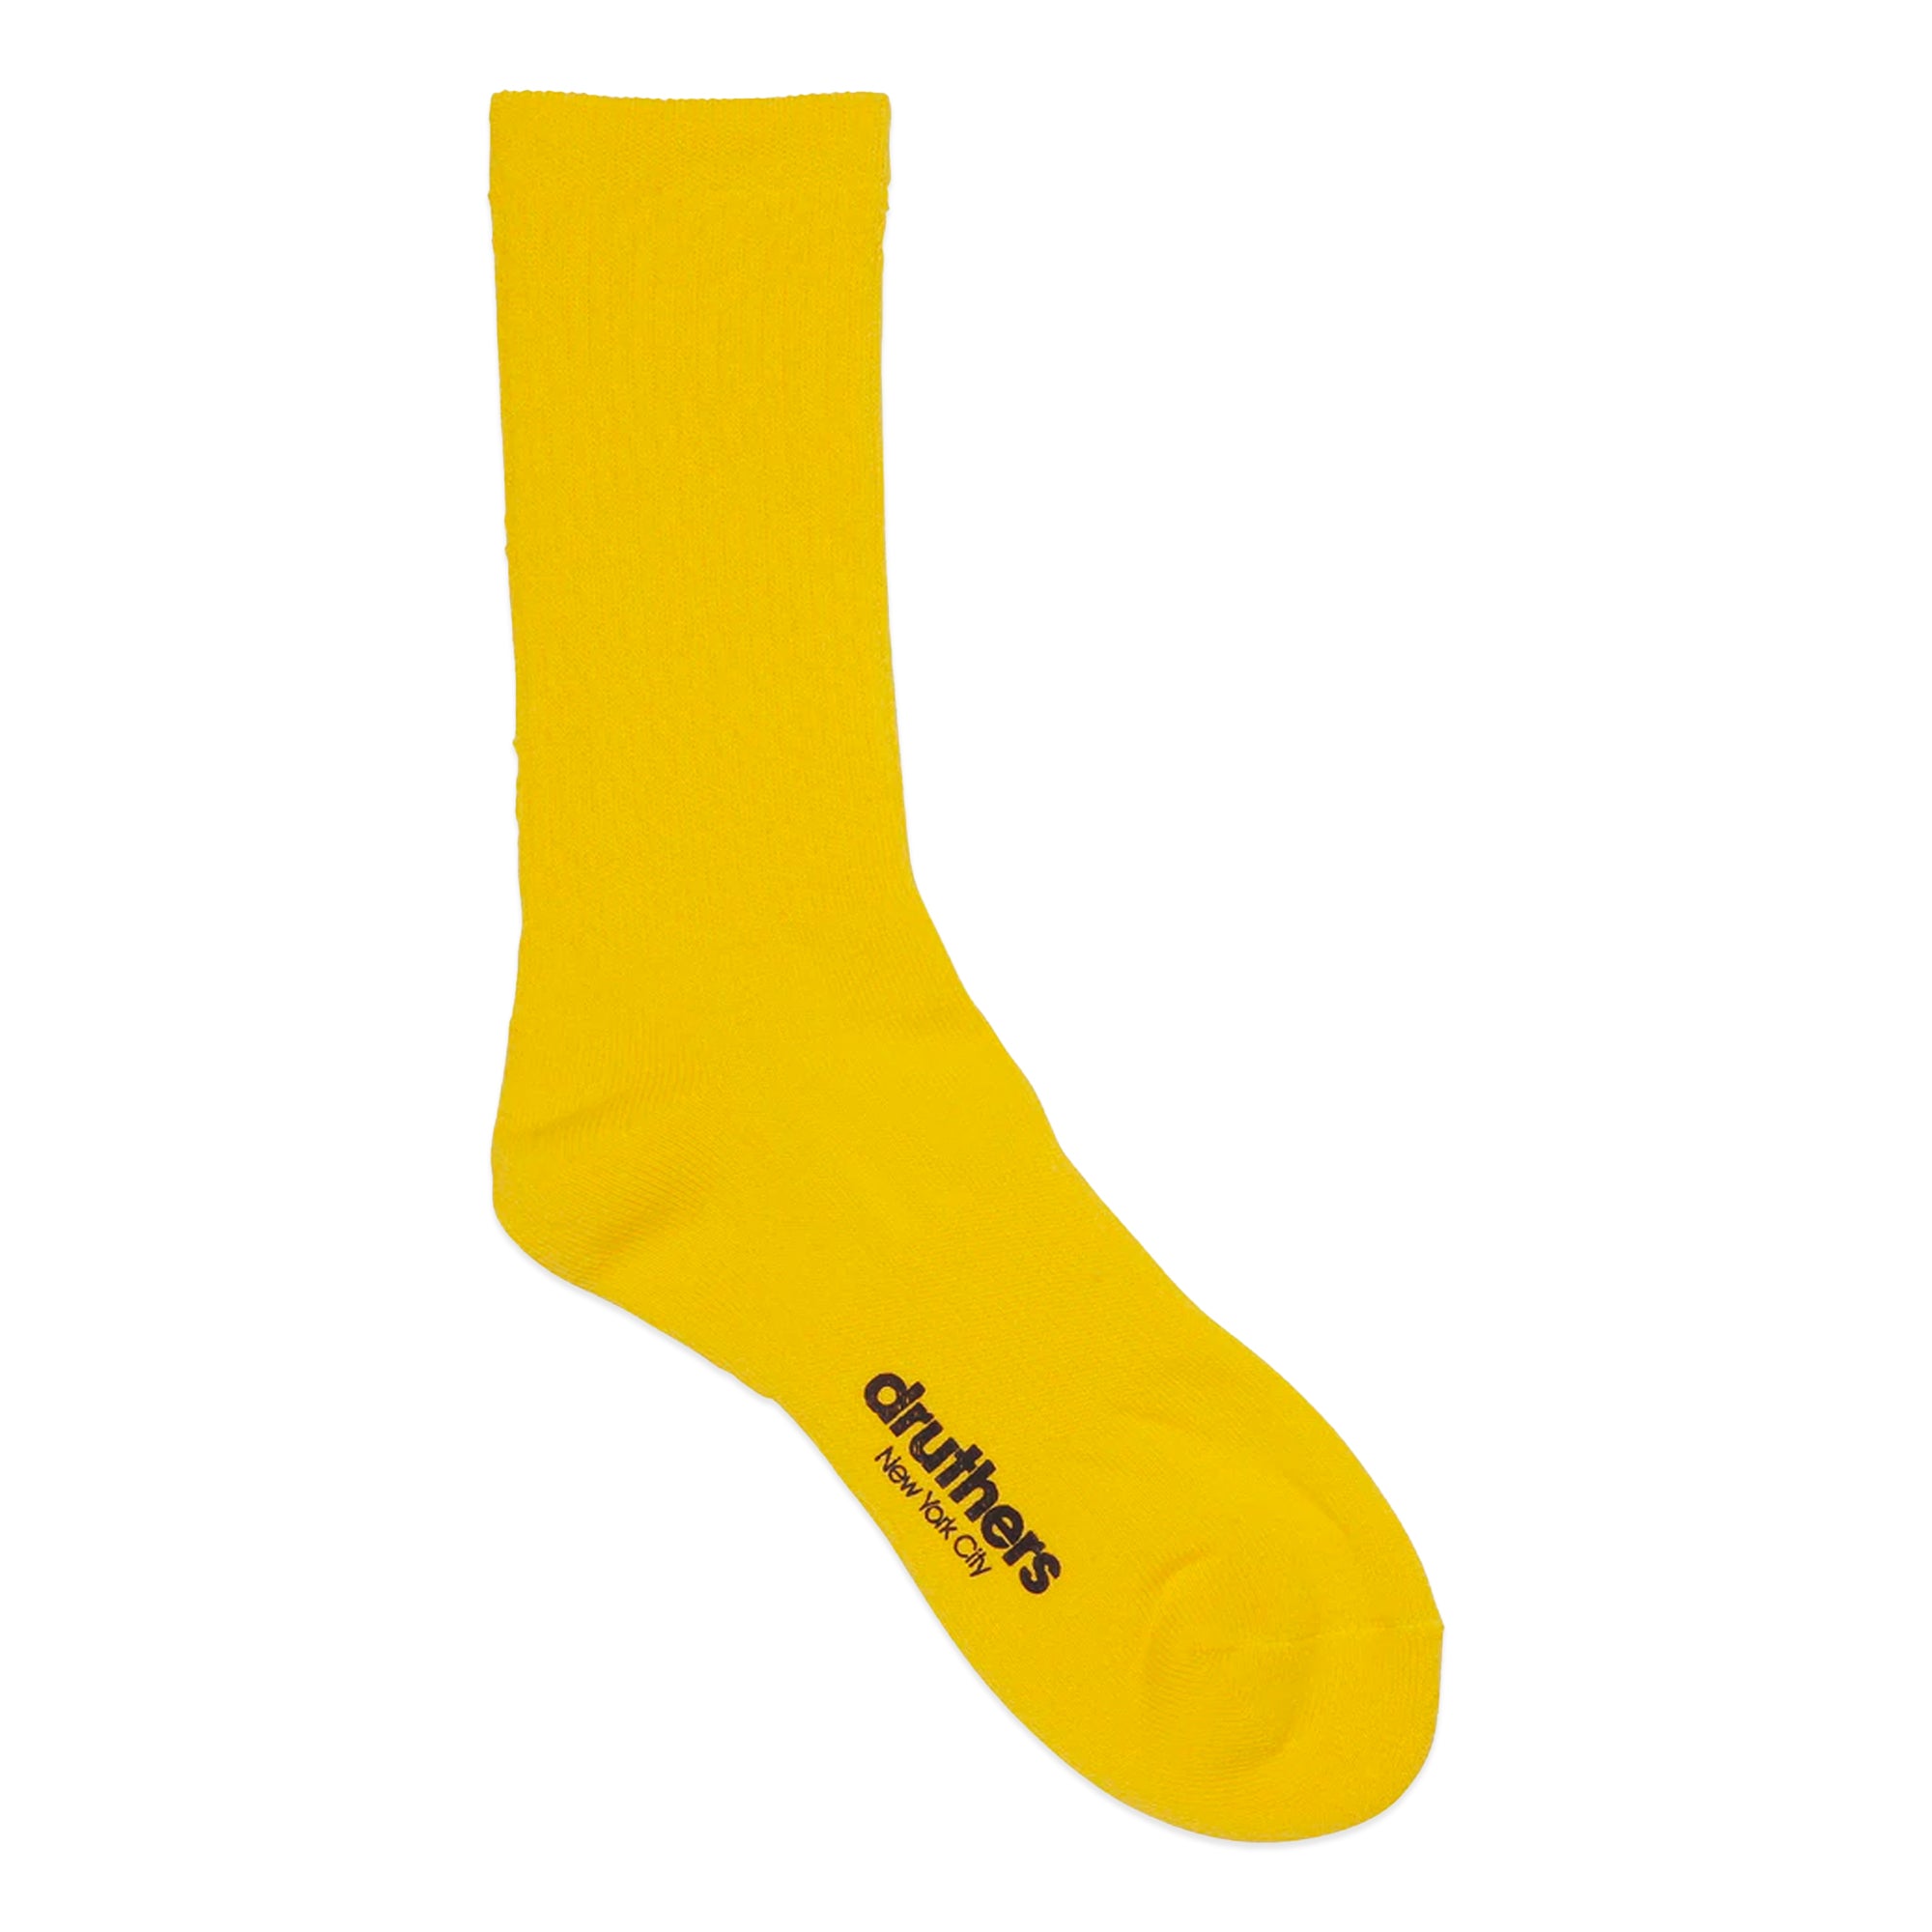 Druthers Organic Cotton Everyday Crew Socks - Canary